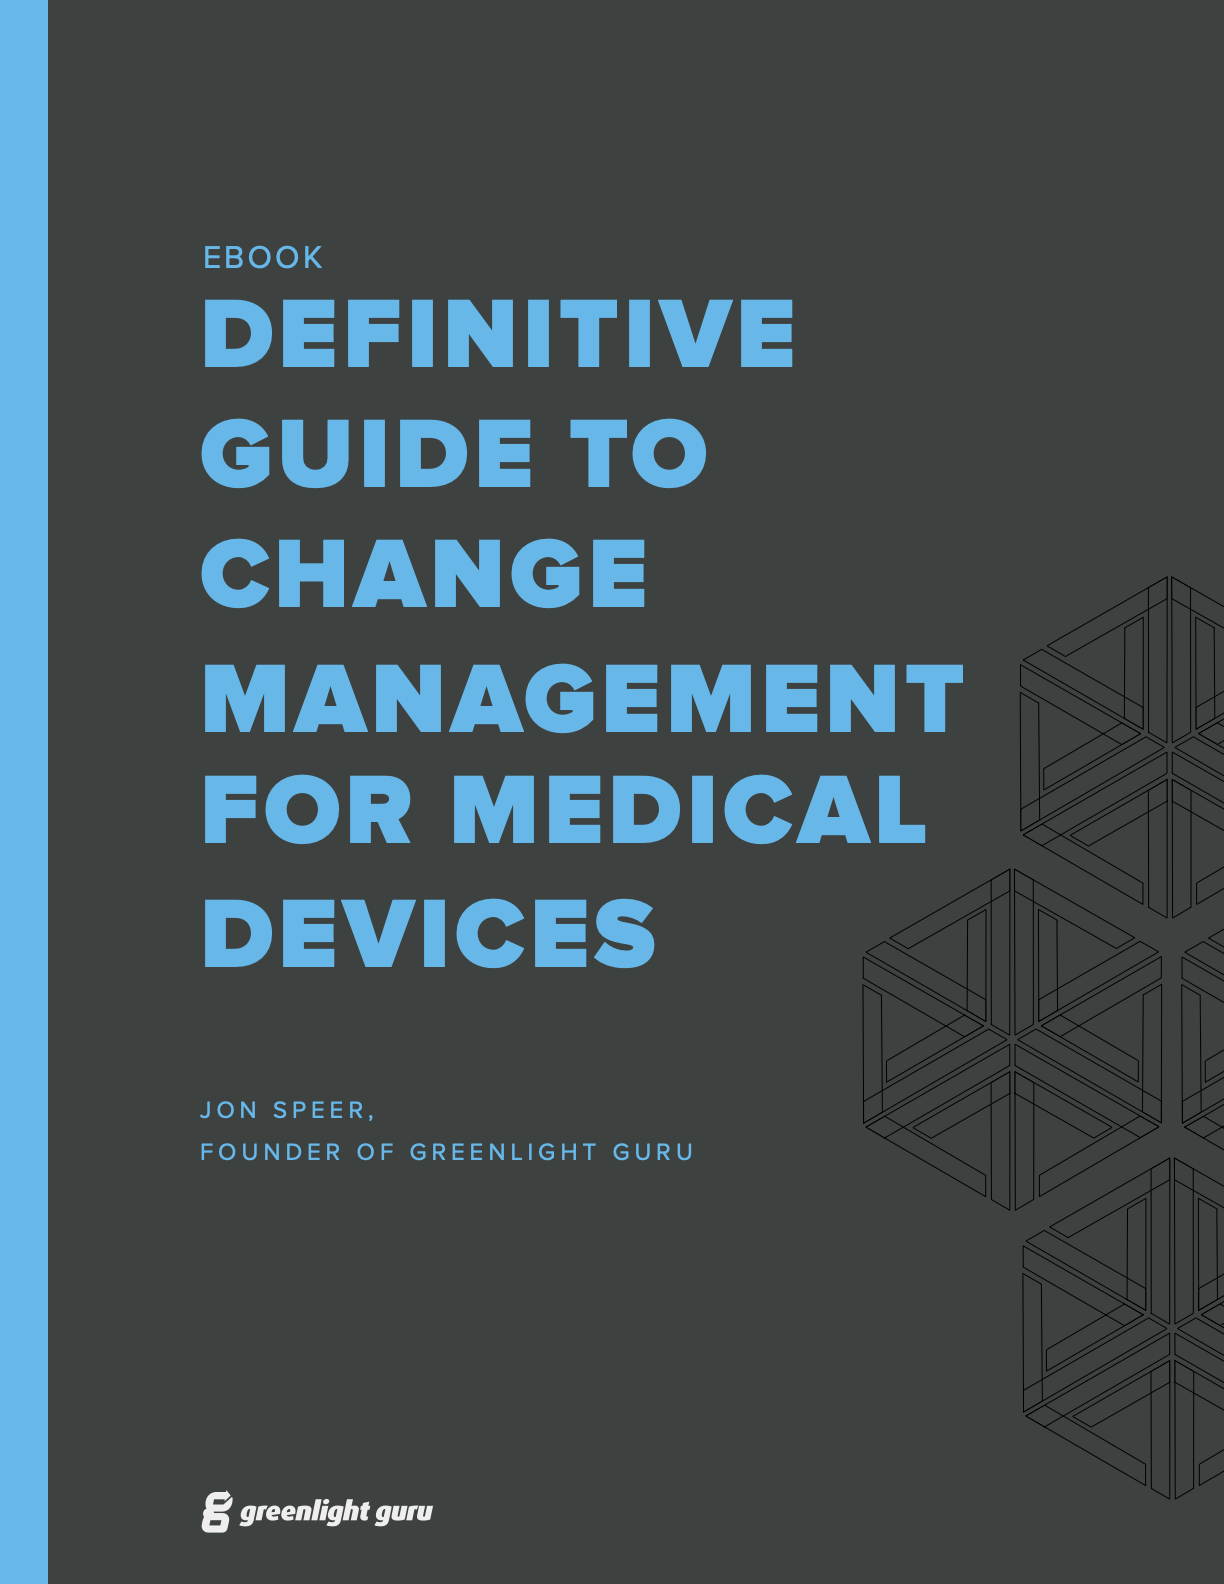 (cover) Definitive Guide to Change Management for Medical Devices_Greenlight Guru